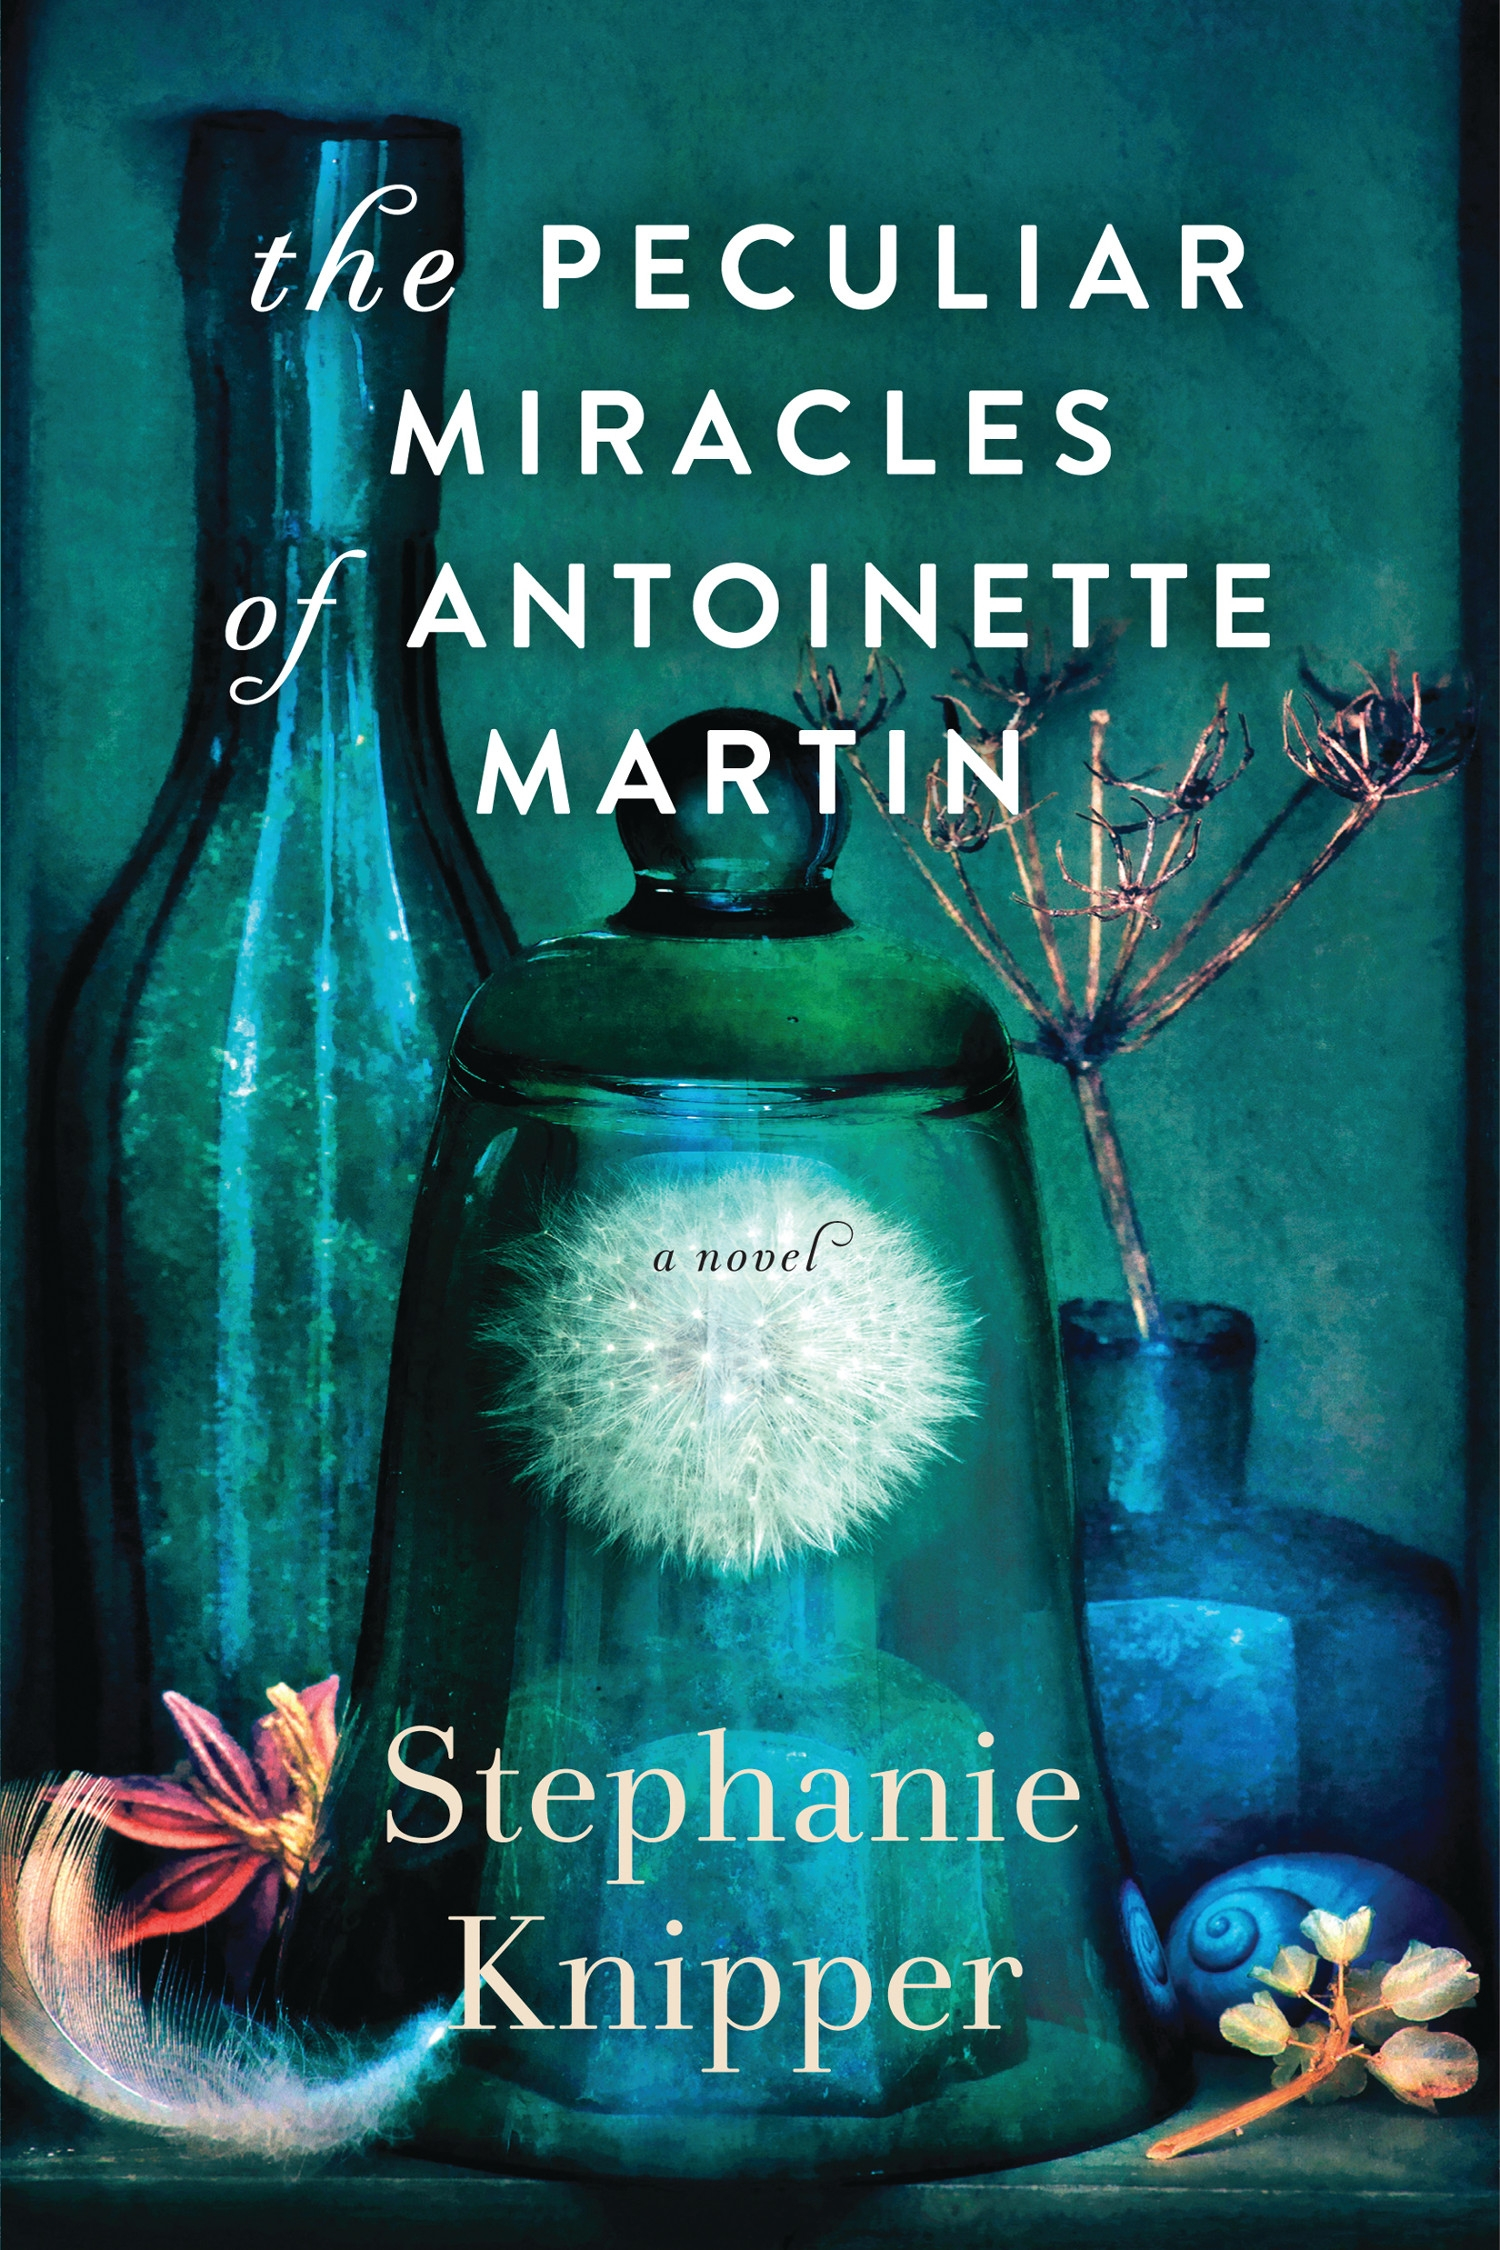 Image for "The Peculiar Miracles of Antoinette Martin"